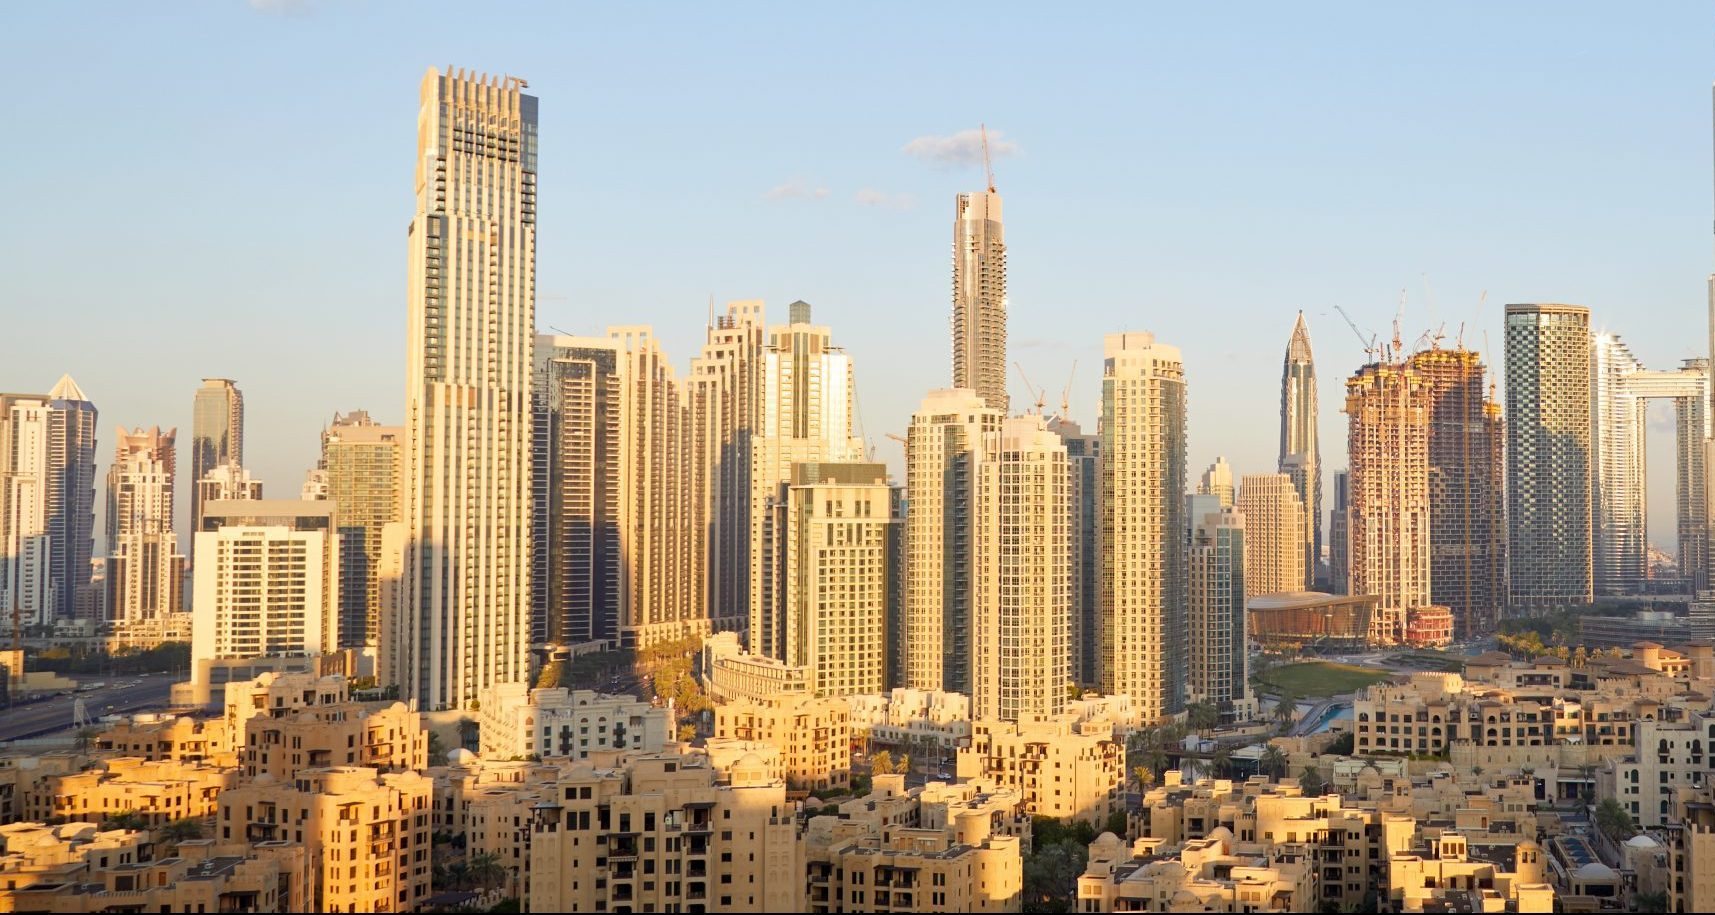  Dubai Issues Law on Expropriation of Property for Public Use